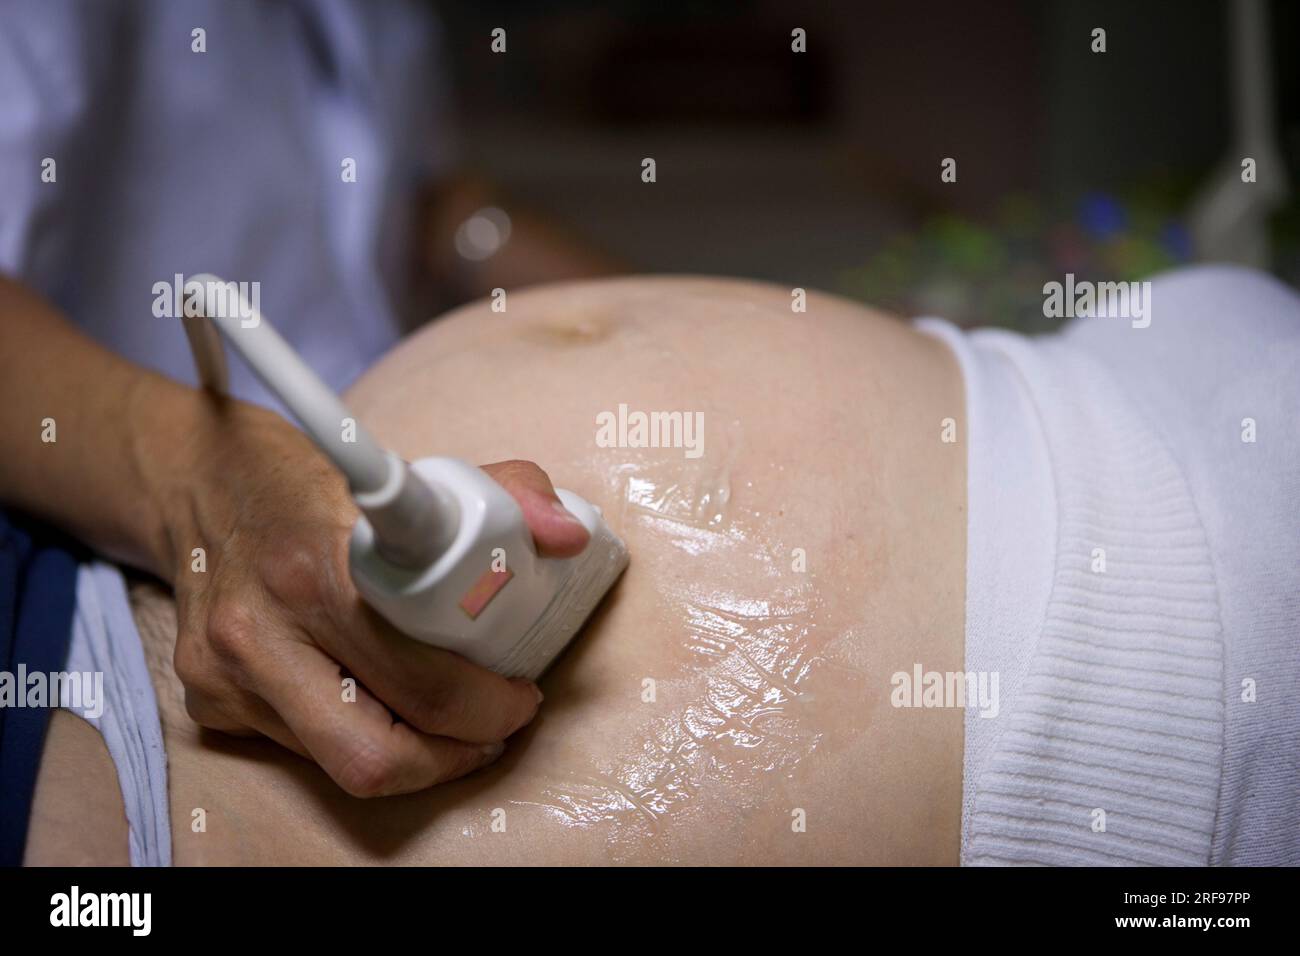 Ultrasound of a pregnant woman at 6 months of pregnancy in the maternity ward of a hospital. Stock Photo